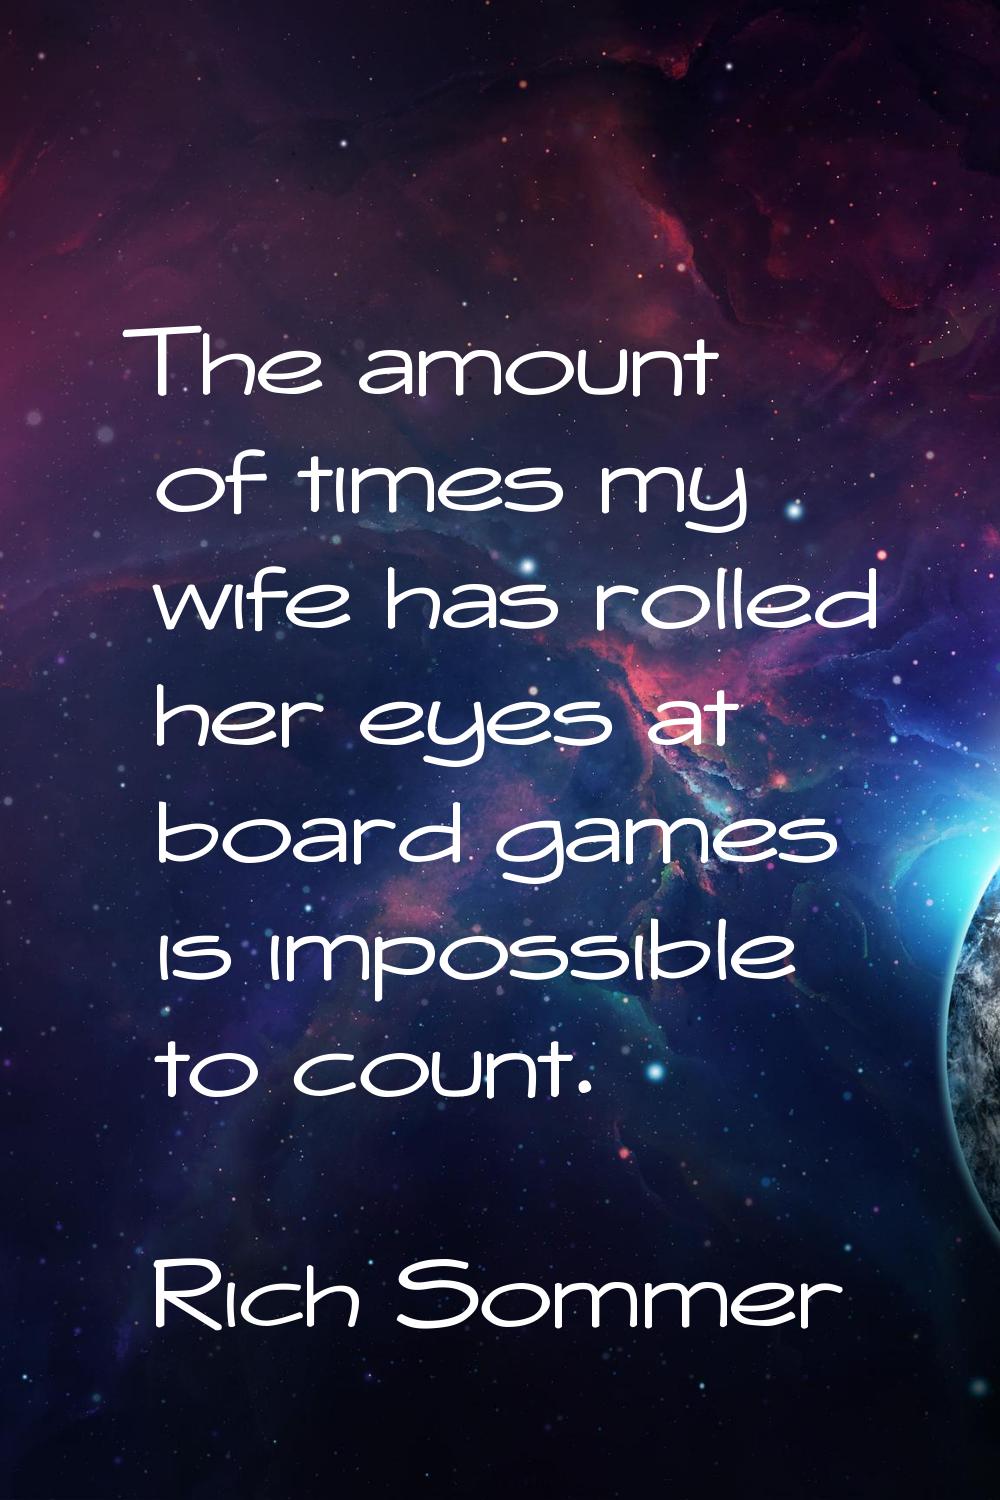 The amount of times my wife has rolled her eyes at board games is impossible to count.